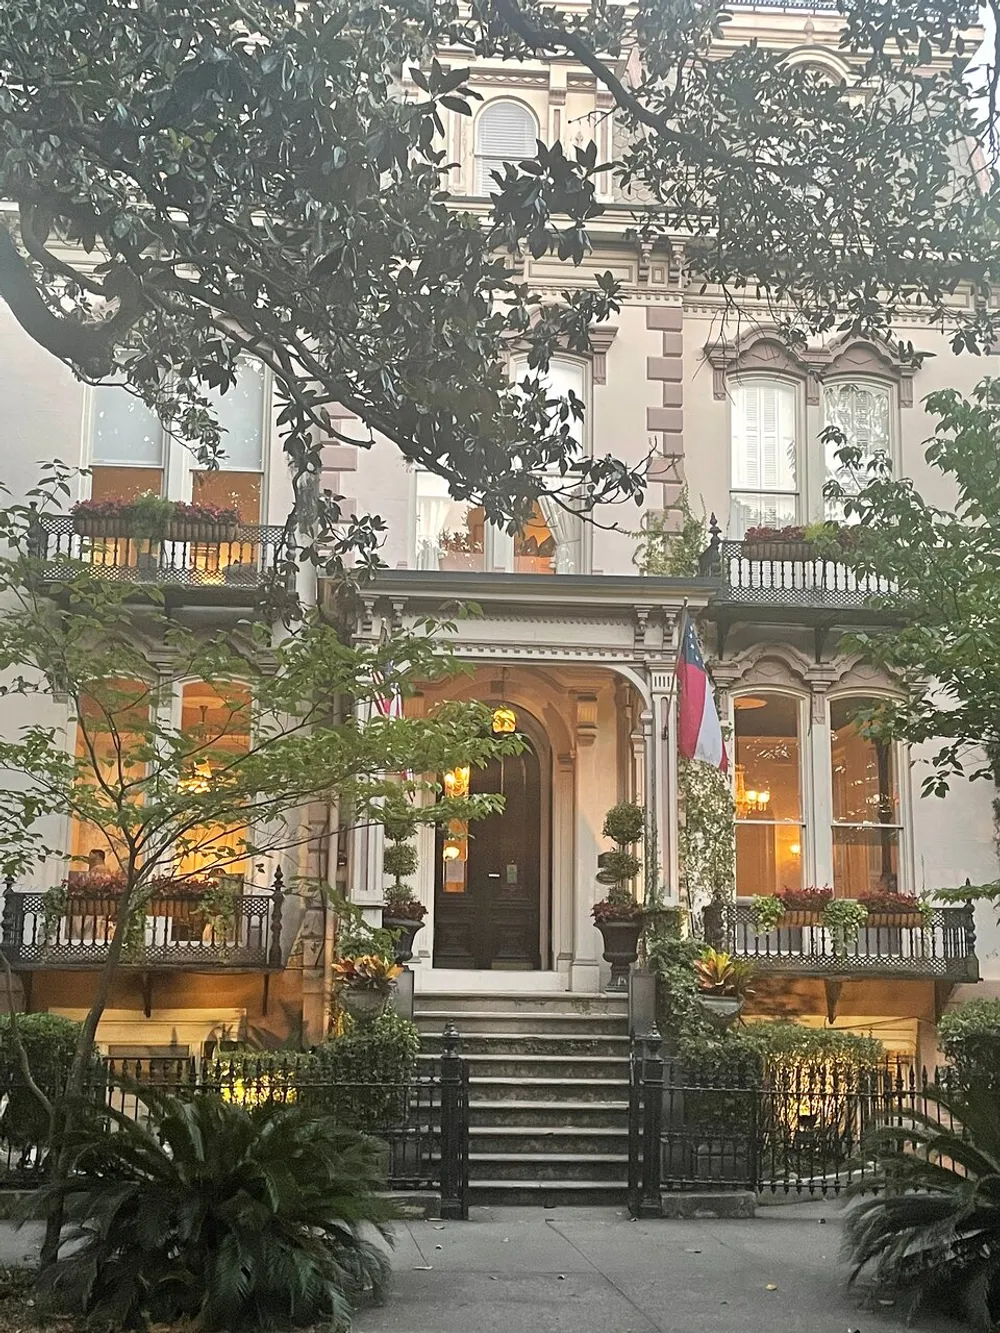 The image shows a picturesque historic building with a warm glow from the lights inside adorned with greenery and flags and framed by surrounding trees and foliage